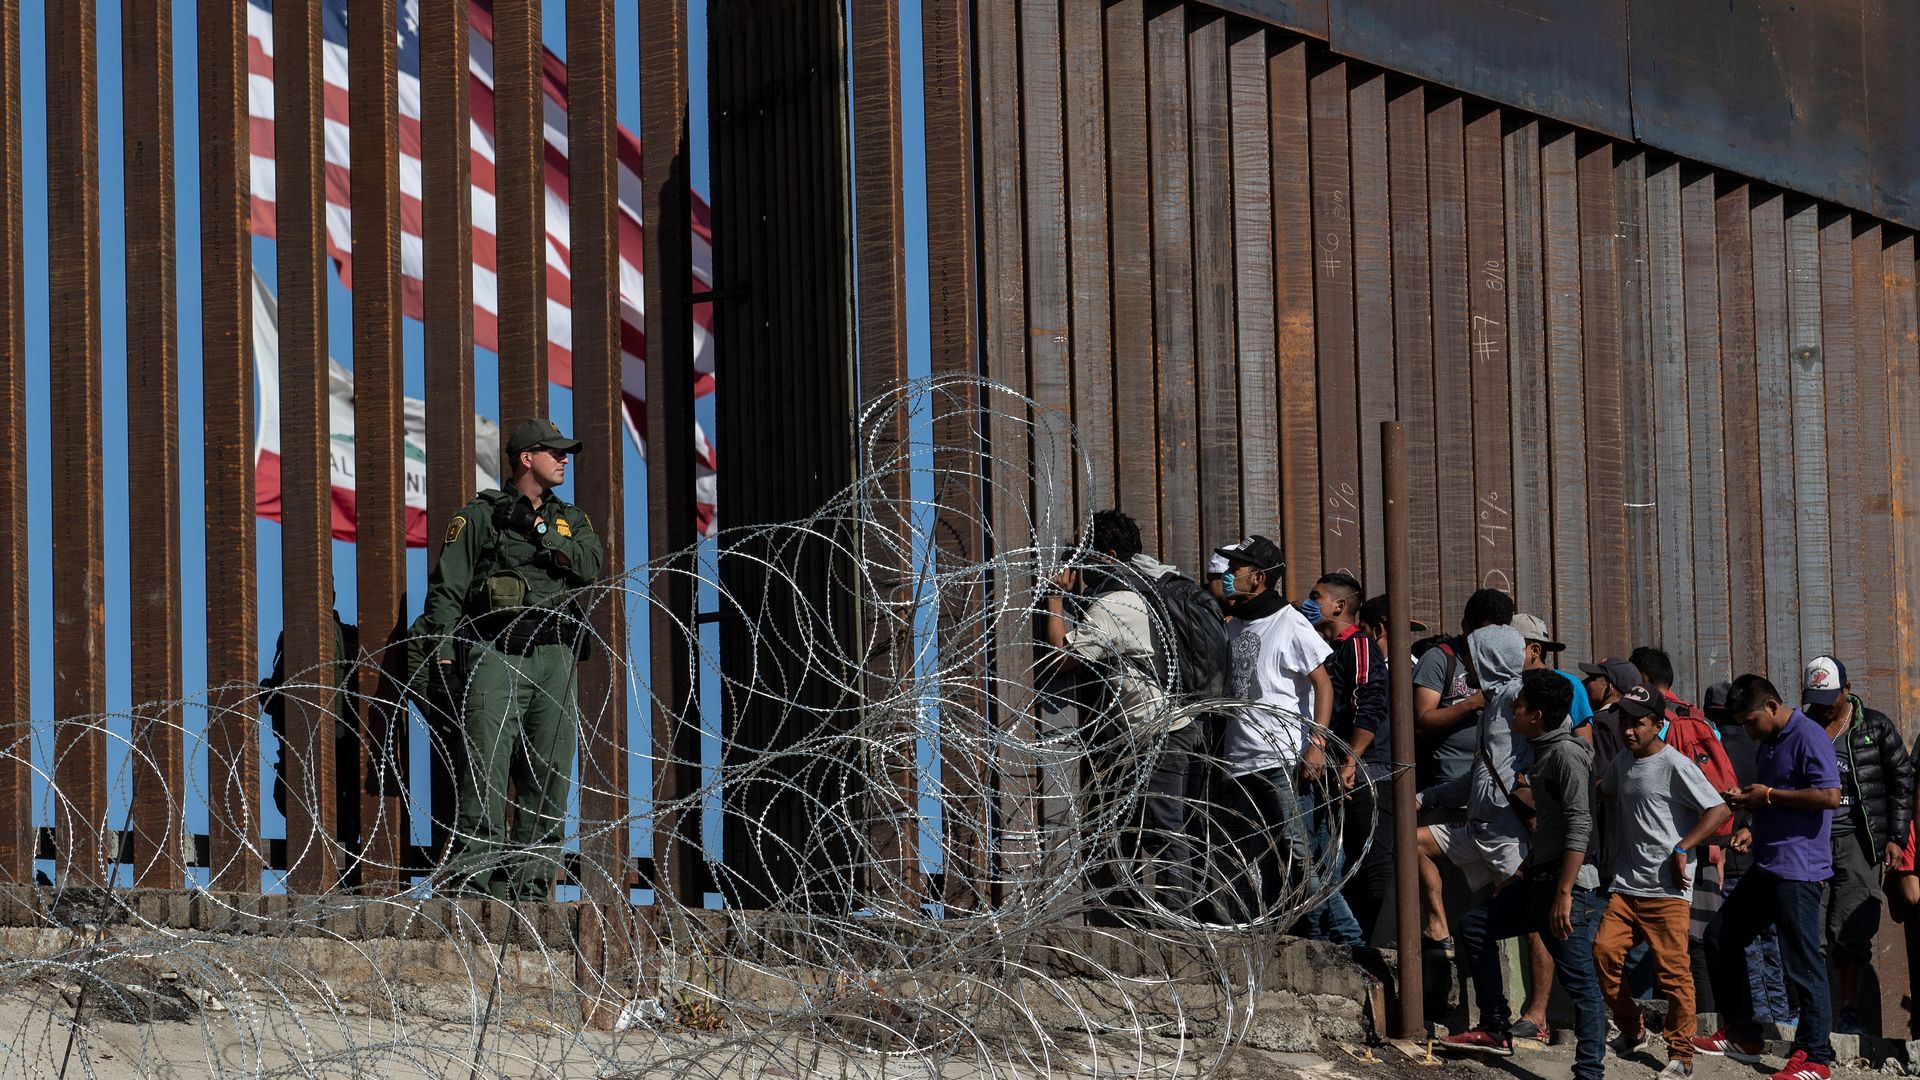 Central American migrants look through a border fence as a US Border PatRol agents stands guard near the El Chaparral border crossing in Tijuana, Baja California State, Mexico, on November 25.